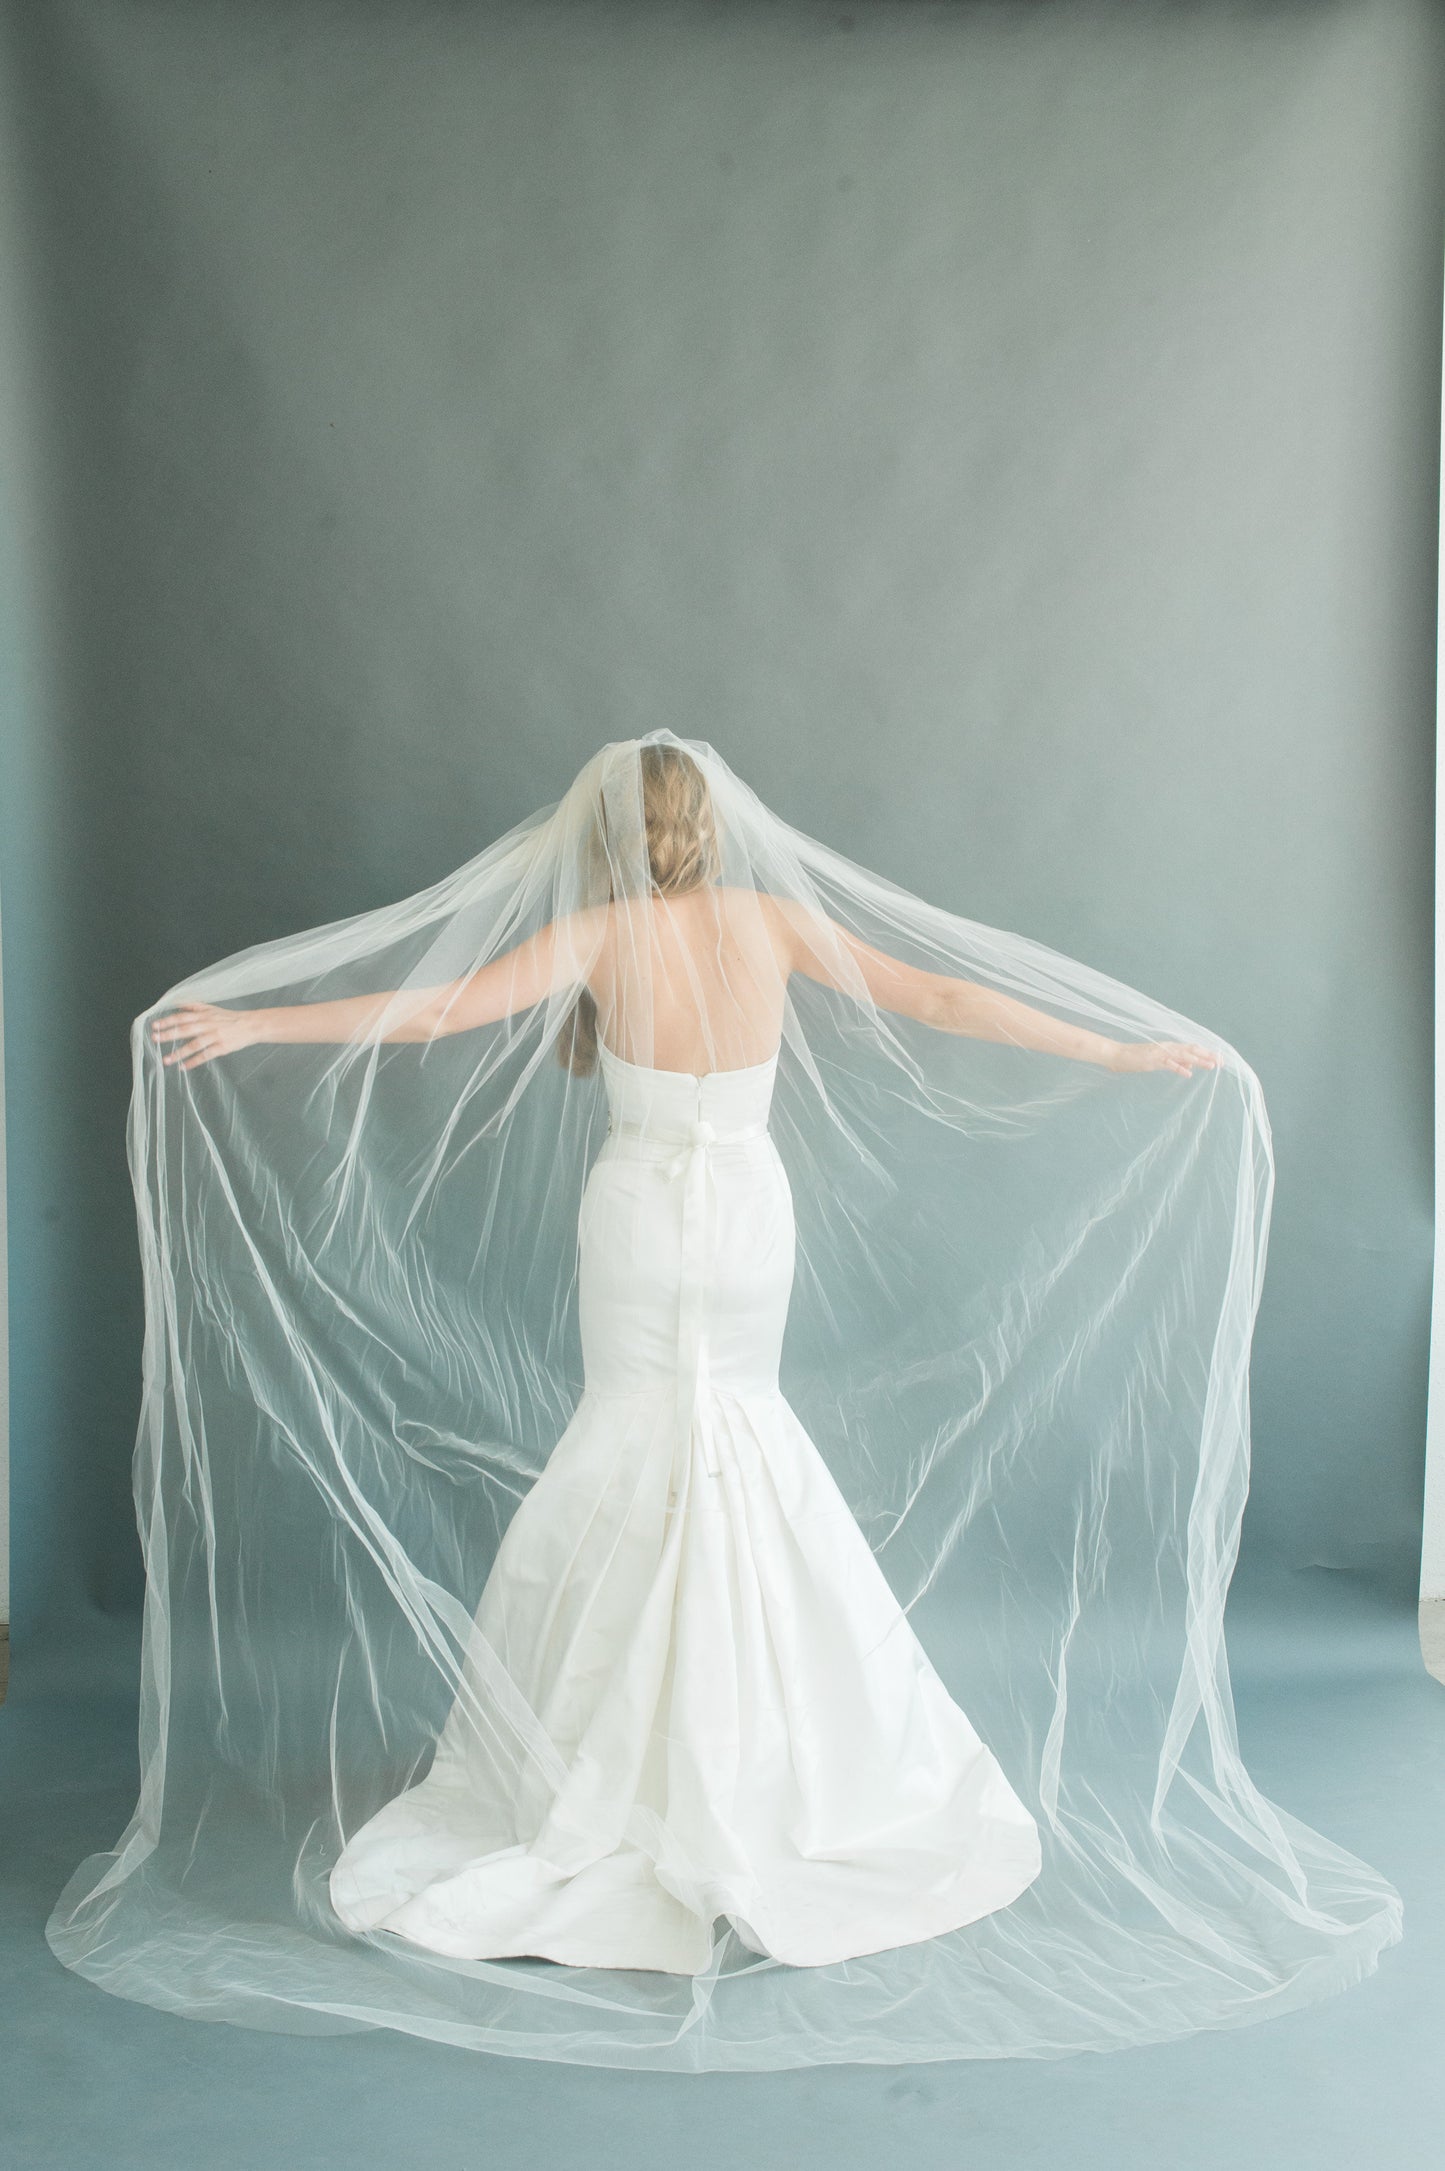 Cathedral Wedding Veil Simple Bridal Veil Ivory Sheer Chapel Veil Voluminous Tulle Royal Veil Custom Long Veil Plain Classic Veil LULU  VEILfor Her, for Bride, for Bridesmaid Gift , for Mother of the Bride, for Wedding Guest or Special Occasion by Camilla Christine Bridal Jewelry and Wedding Accessories. Bridal Style Inspiration Trends for Bride, Wedding Ideas